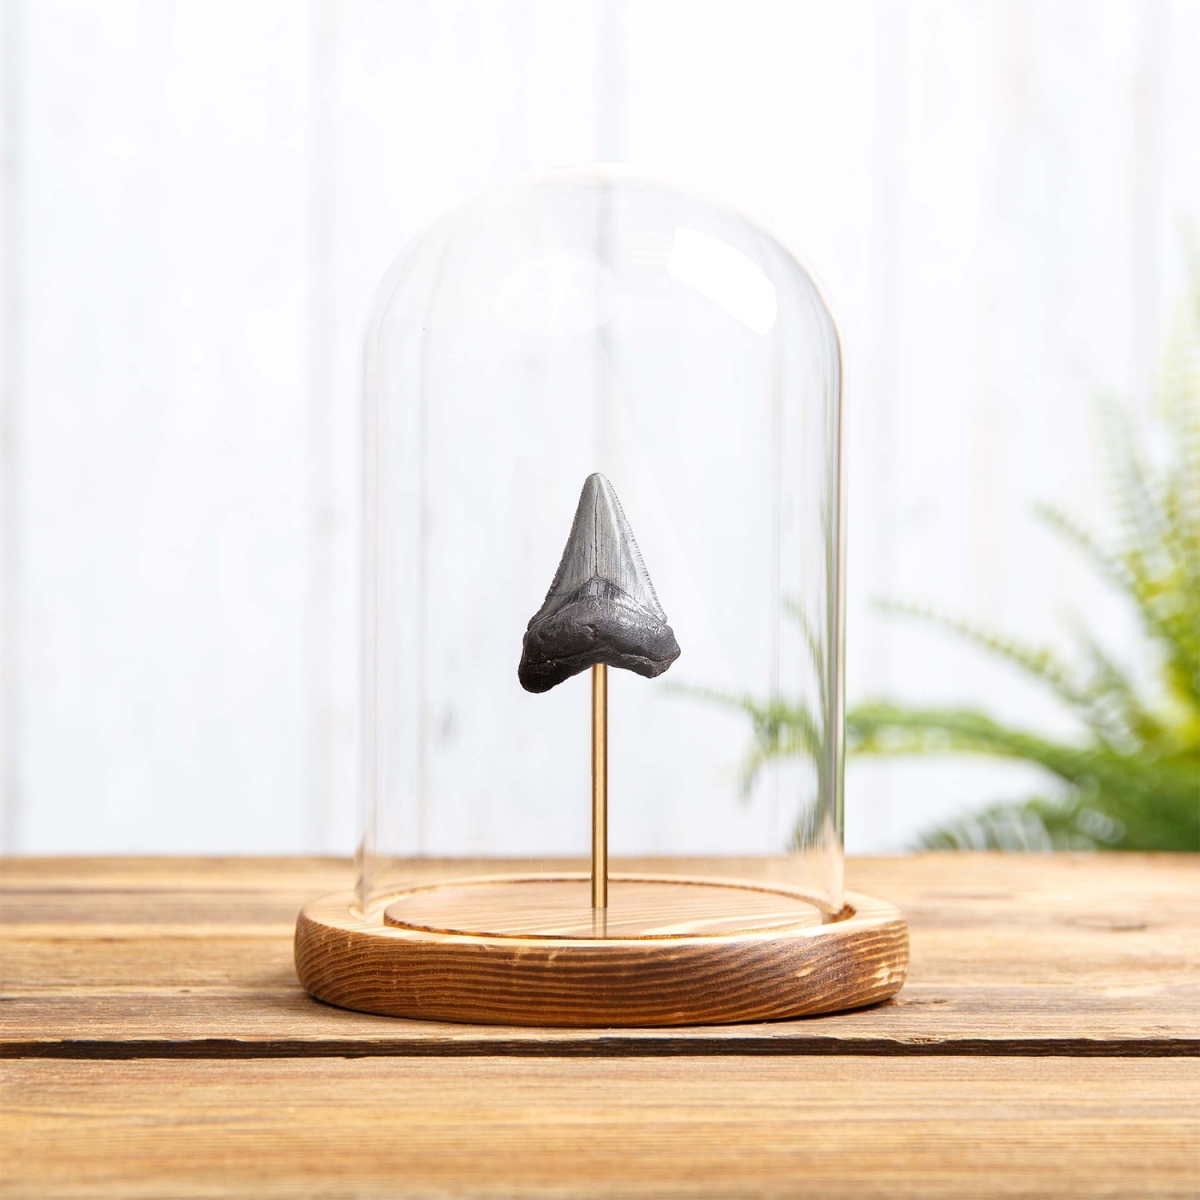 1-1.5 Inch Megalodon Shark Tooth Fossil in Glass Dome with Wooden Base (Carcharodon megalodon)